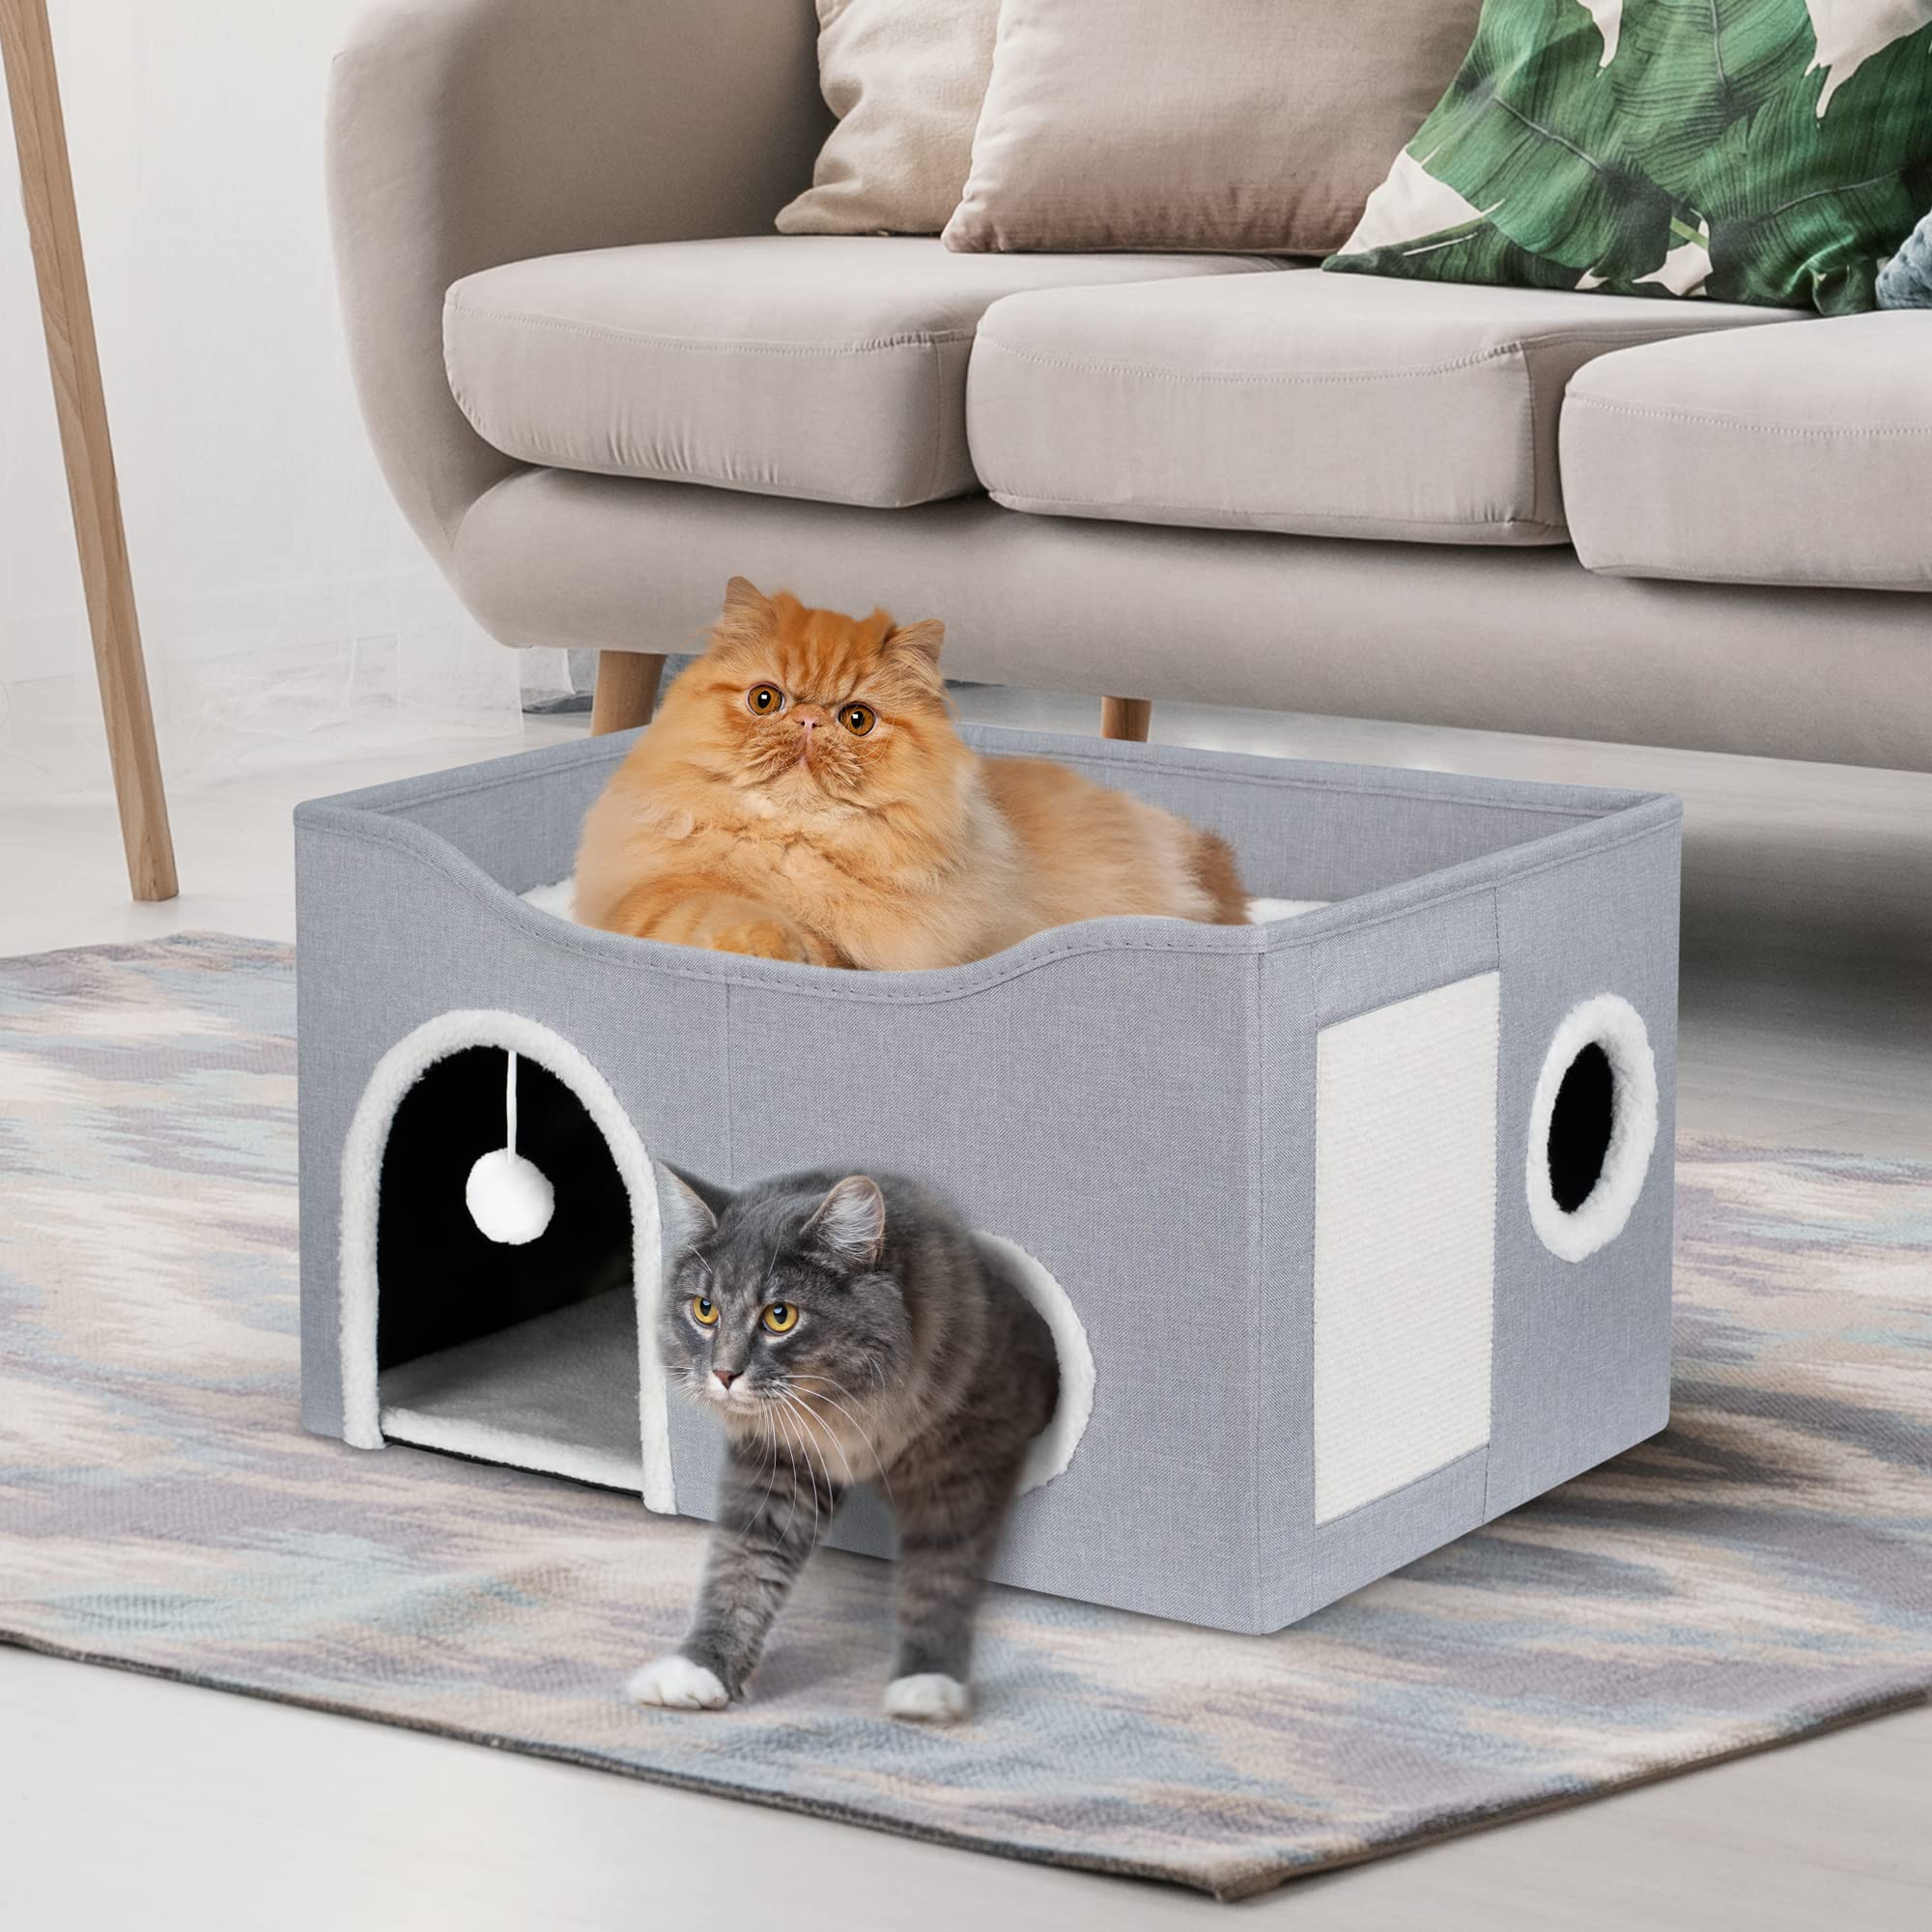 Heeyoo Cat House for Indoor Cats - Large Cat Bed Cave with Fluffy Ball and Scratch Pad, Foldable Cat Condos, Cat Cubes, Cat Hideaway, Covered Cat Bed